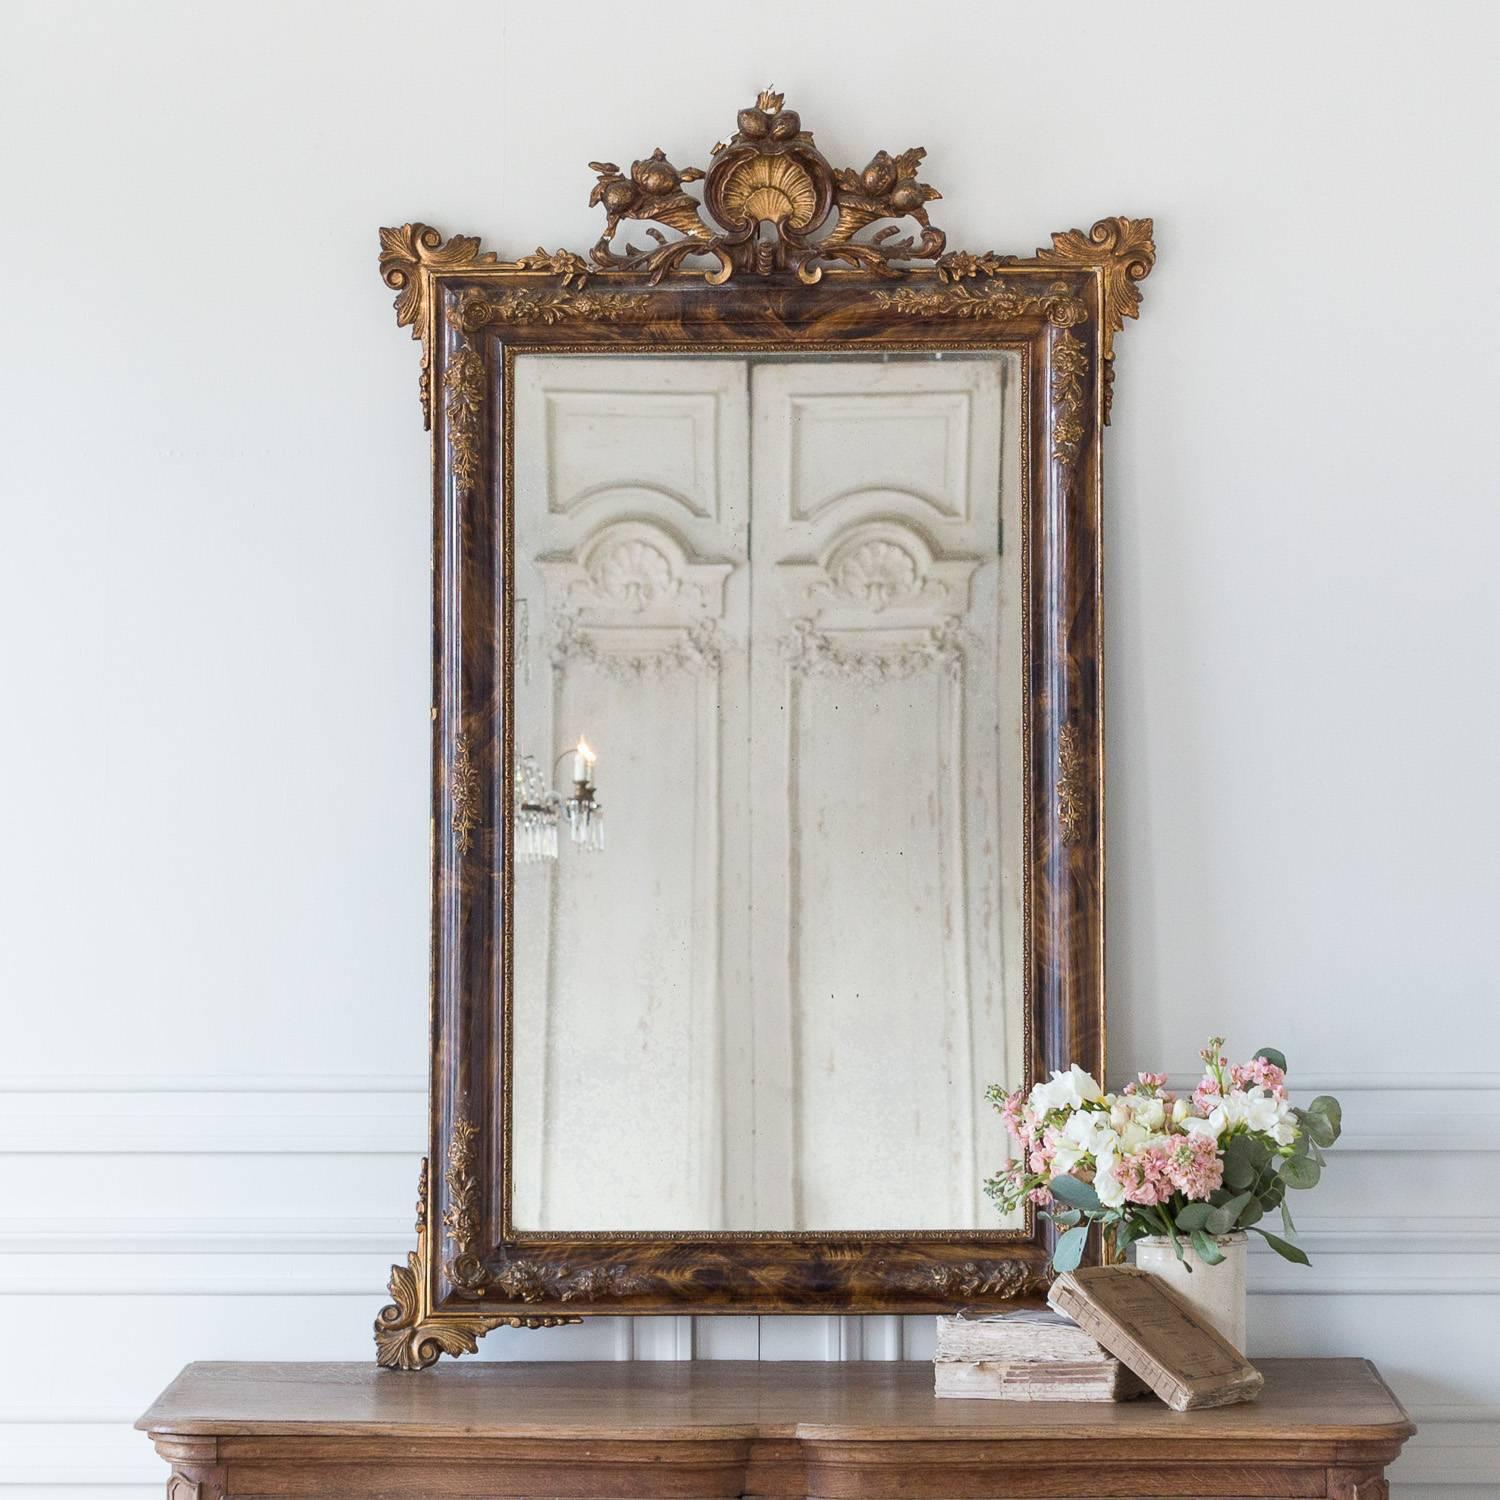 Antique mirror featuring an elaborately carved crest of a shell flanked by cornucopias spilling out fruit and flowers. The glass is perfectly worn with light stains detailing the age throughout the piece. The tortoise-stained wood and detailed